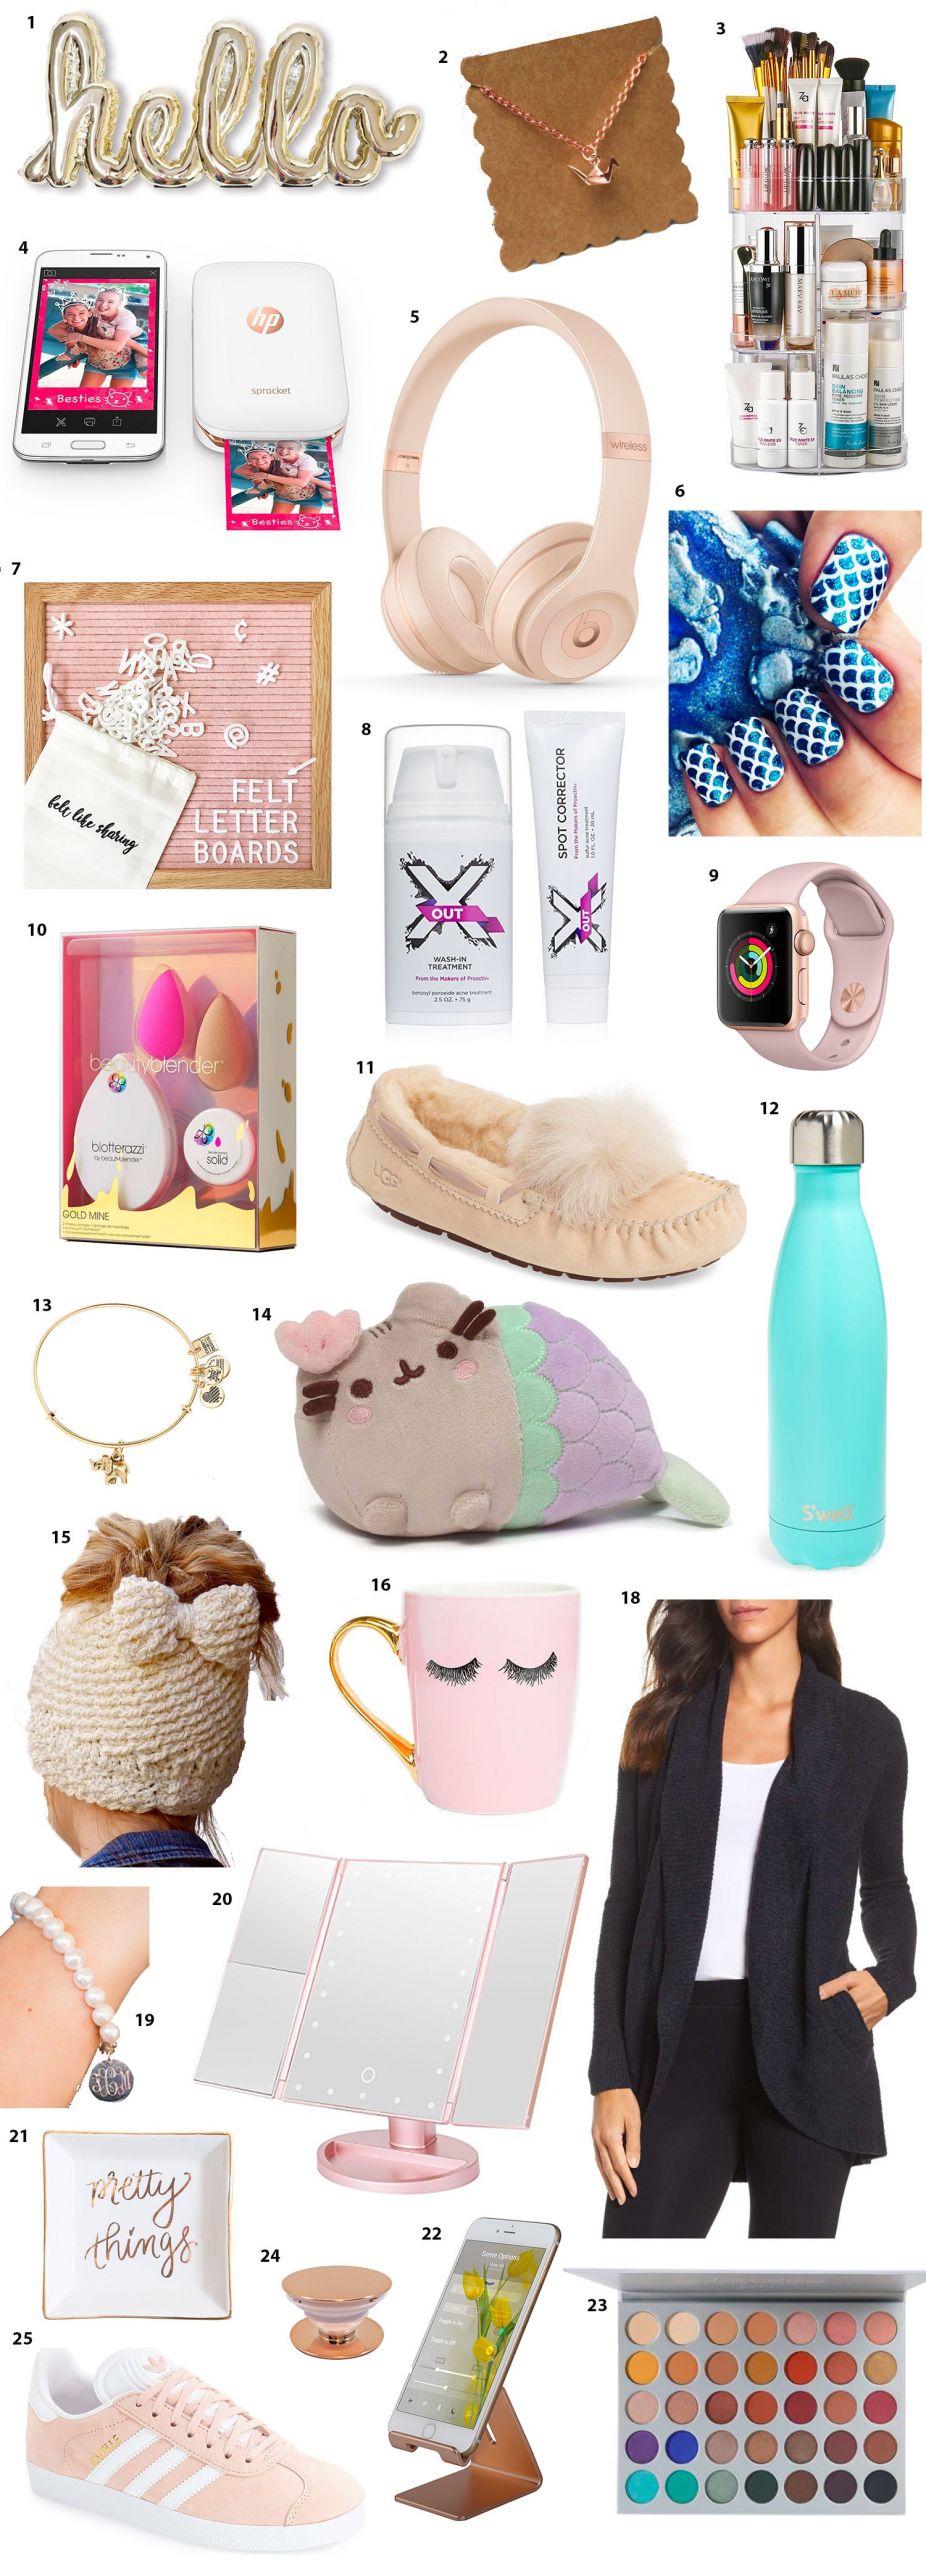 Holiday Gift Ideas For Teens
 Top Gifts for Teens This Christmas